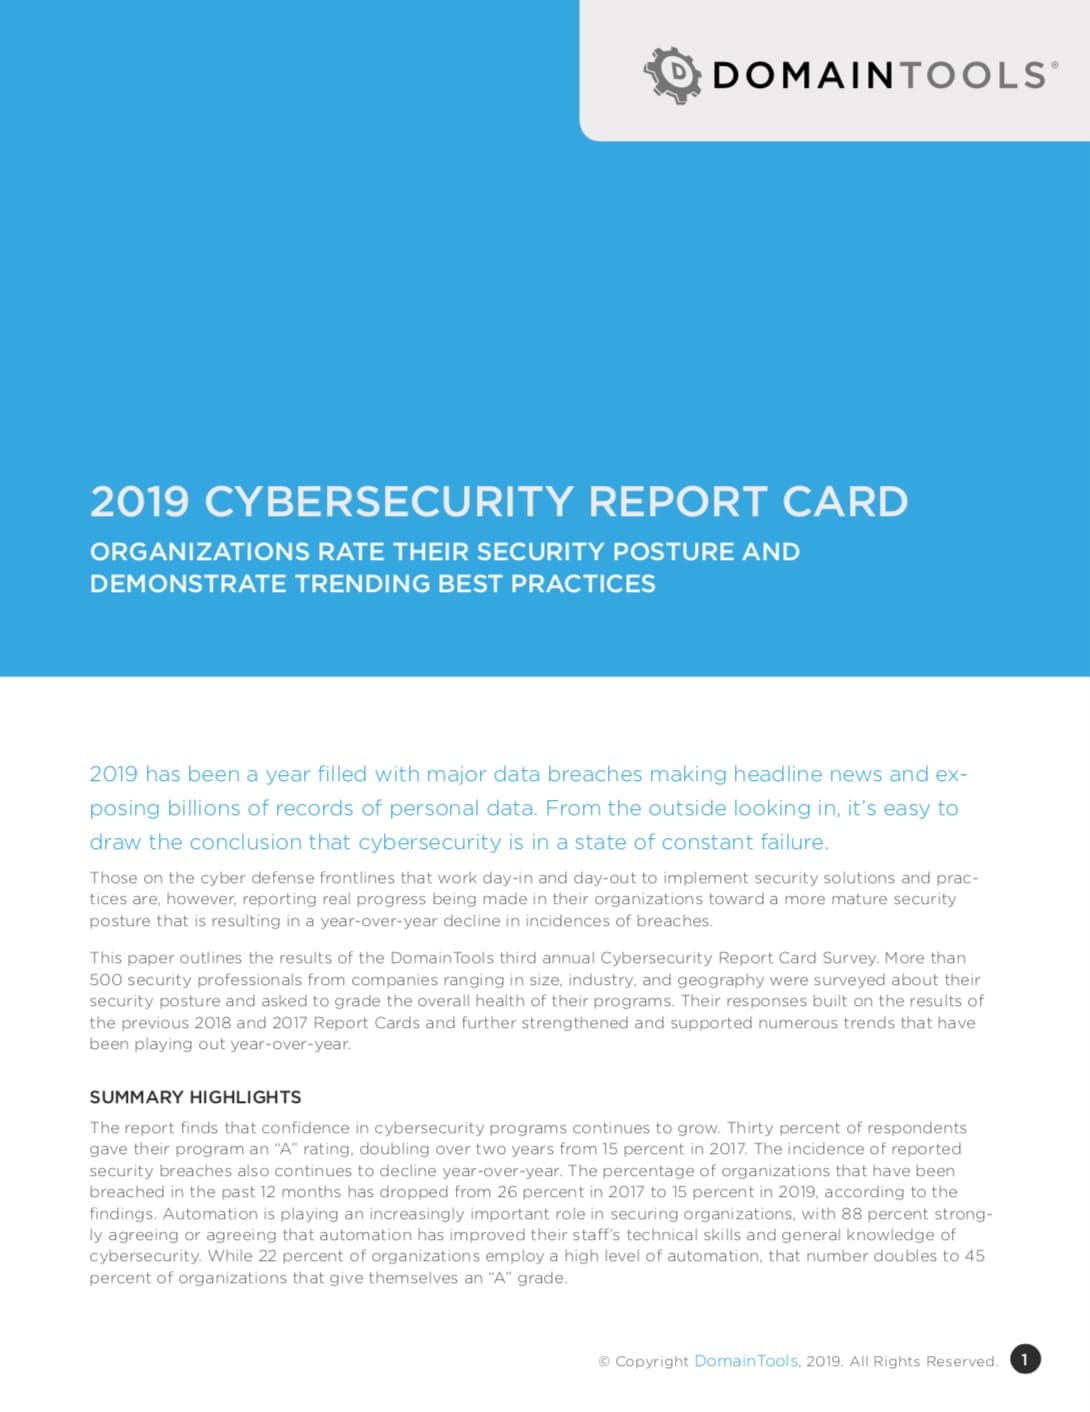 cybersecurity report card thumbnail